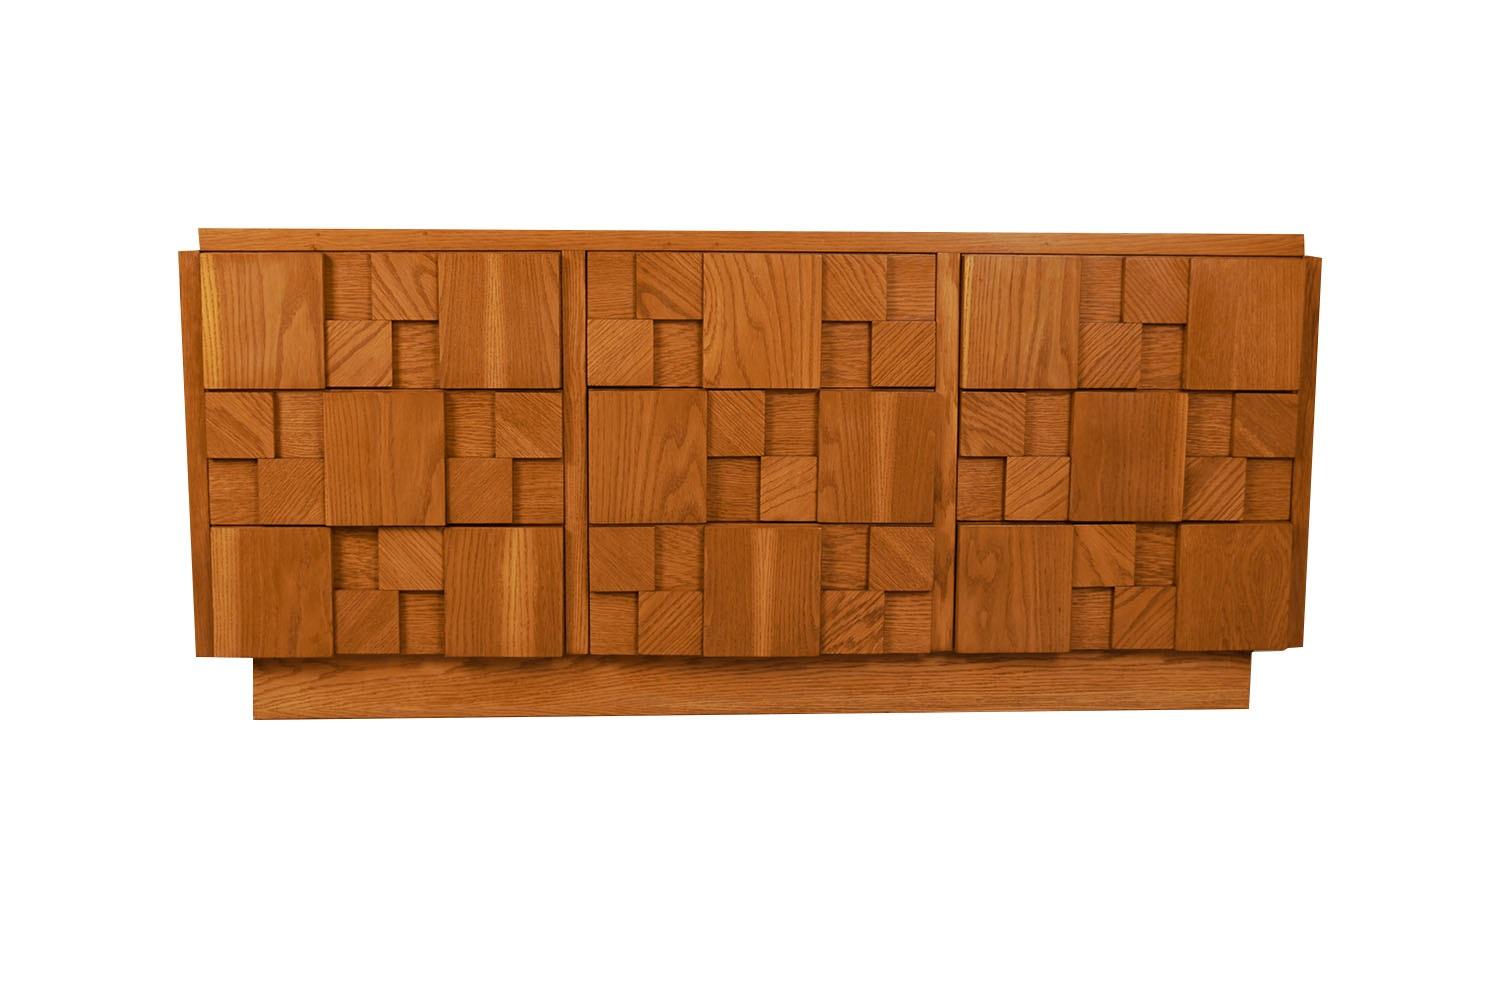 A unique cubist style nine drawer dresser by Lane furniture features the brutalist style made popular by Paul Evans. Bold and impressive, with heavy solid wood construction, figured geometric drawer fronts. The nine-drawer dresser offers plenty of